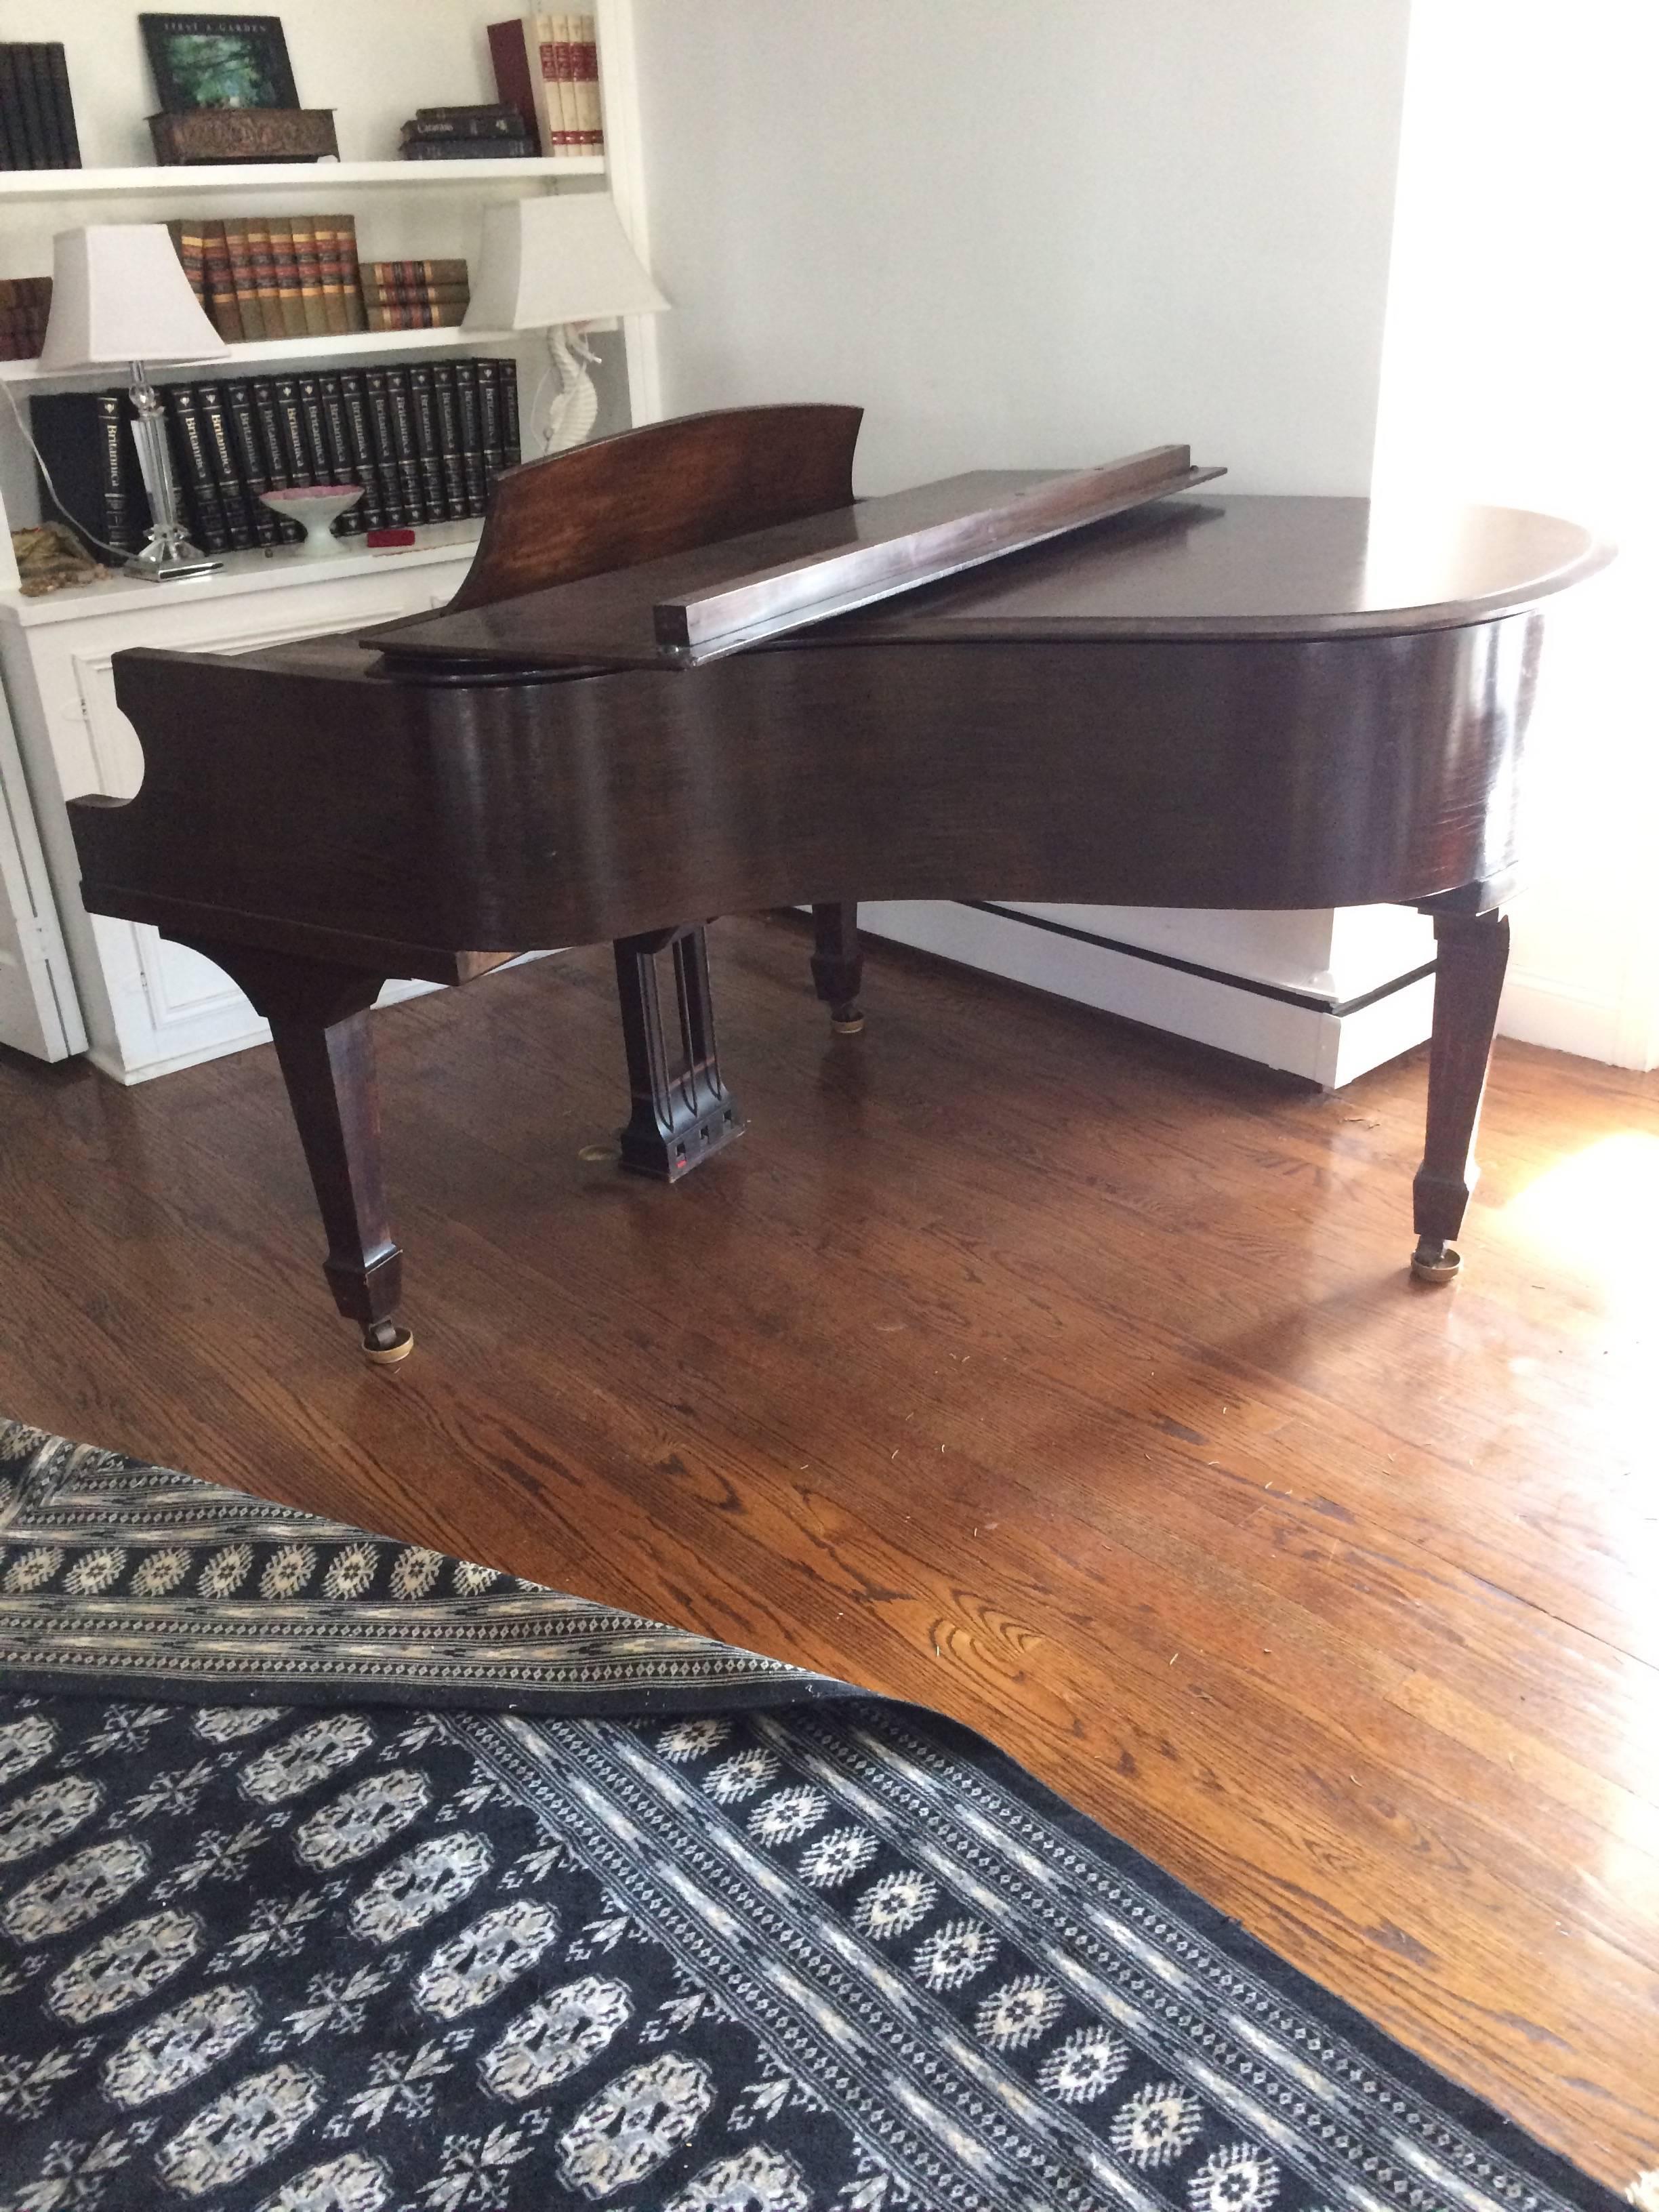 Well loved baby grand piano in a gorgeous dark wood with handsome brass chickering label on the front and painted shield inside. Last tuned in 2014, good working order. Measures: Apron height 23.75.